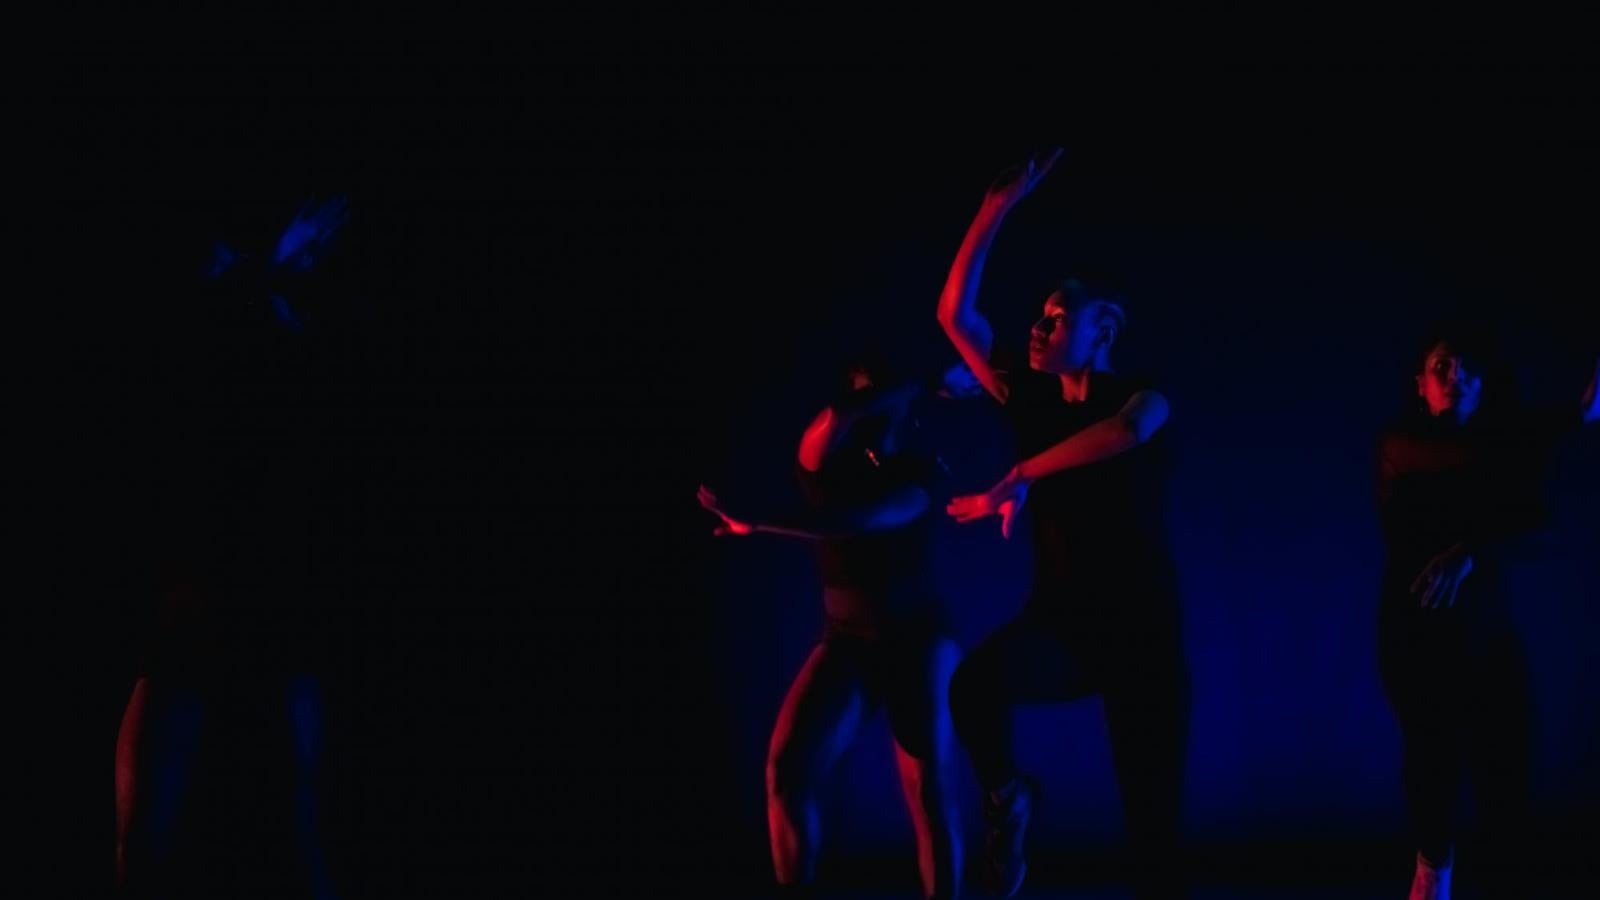 Several dancers perform on a darkly lit stage with red and blue lighting